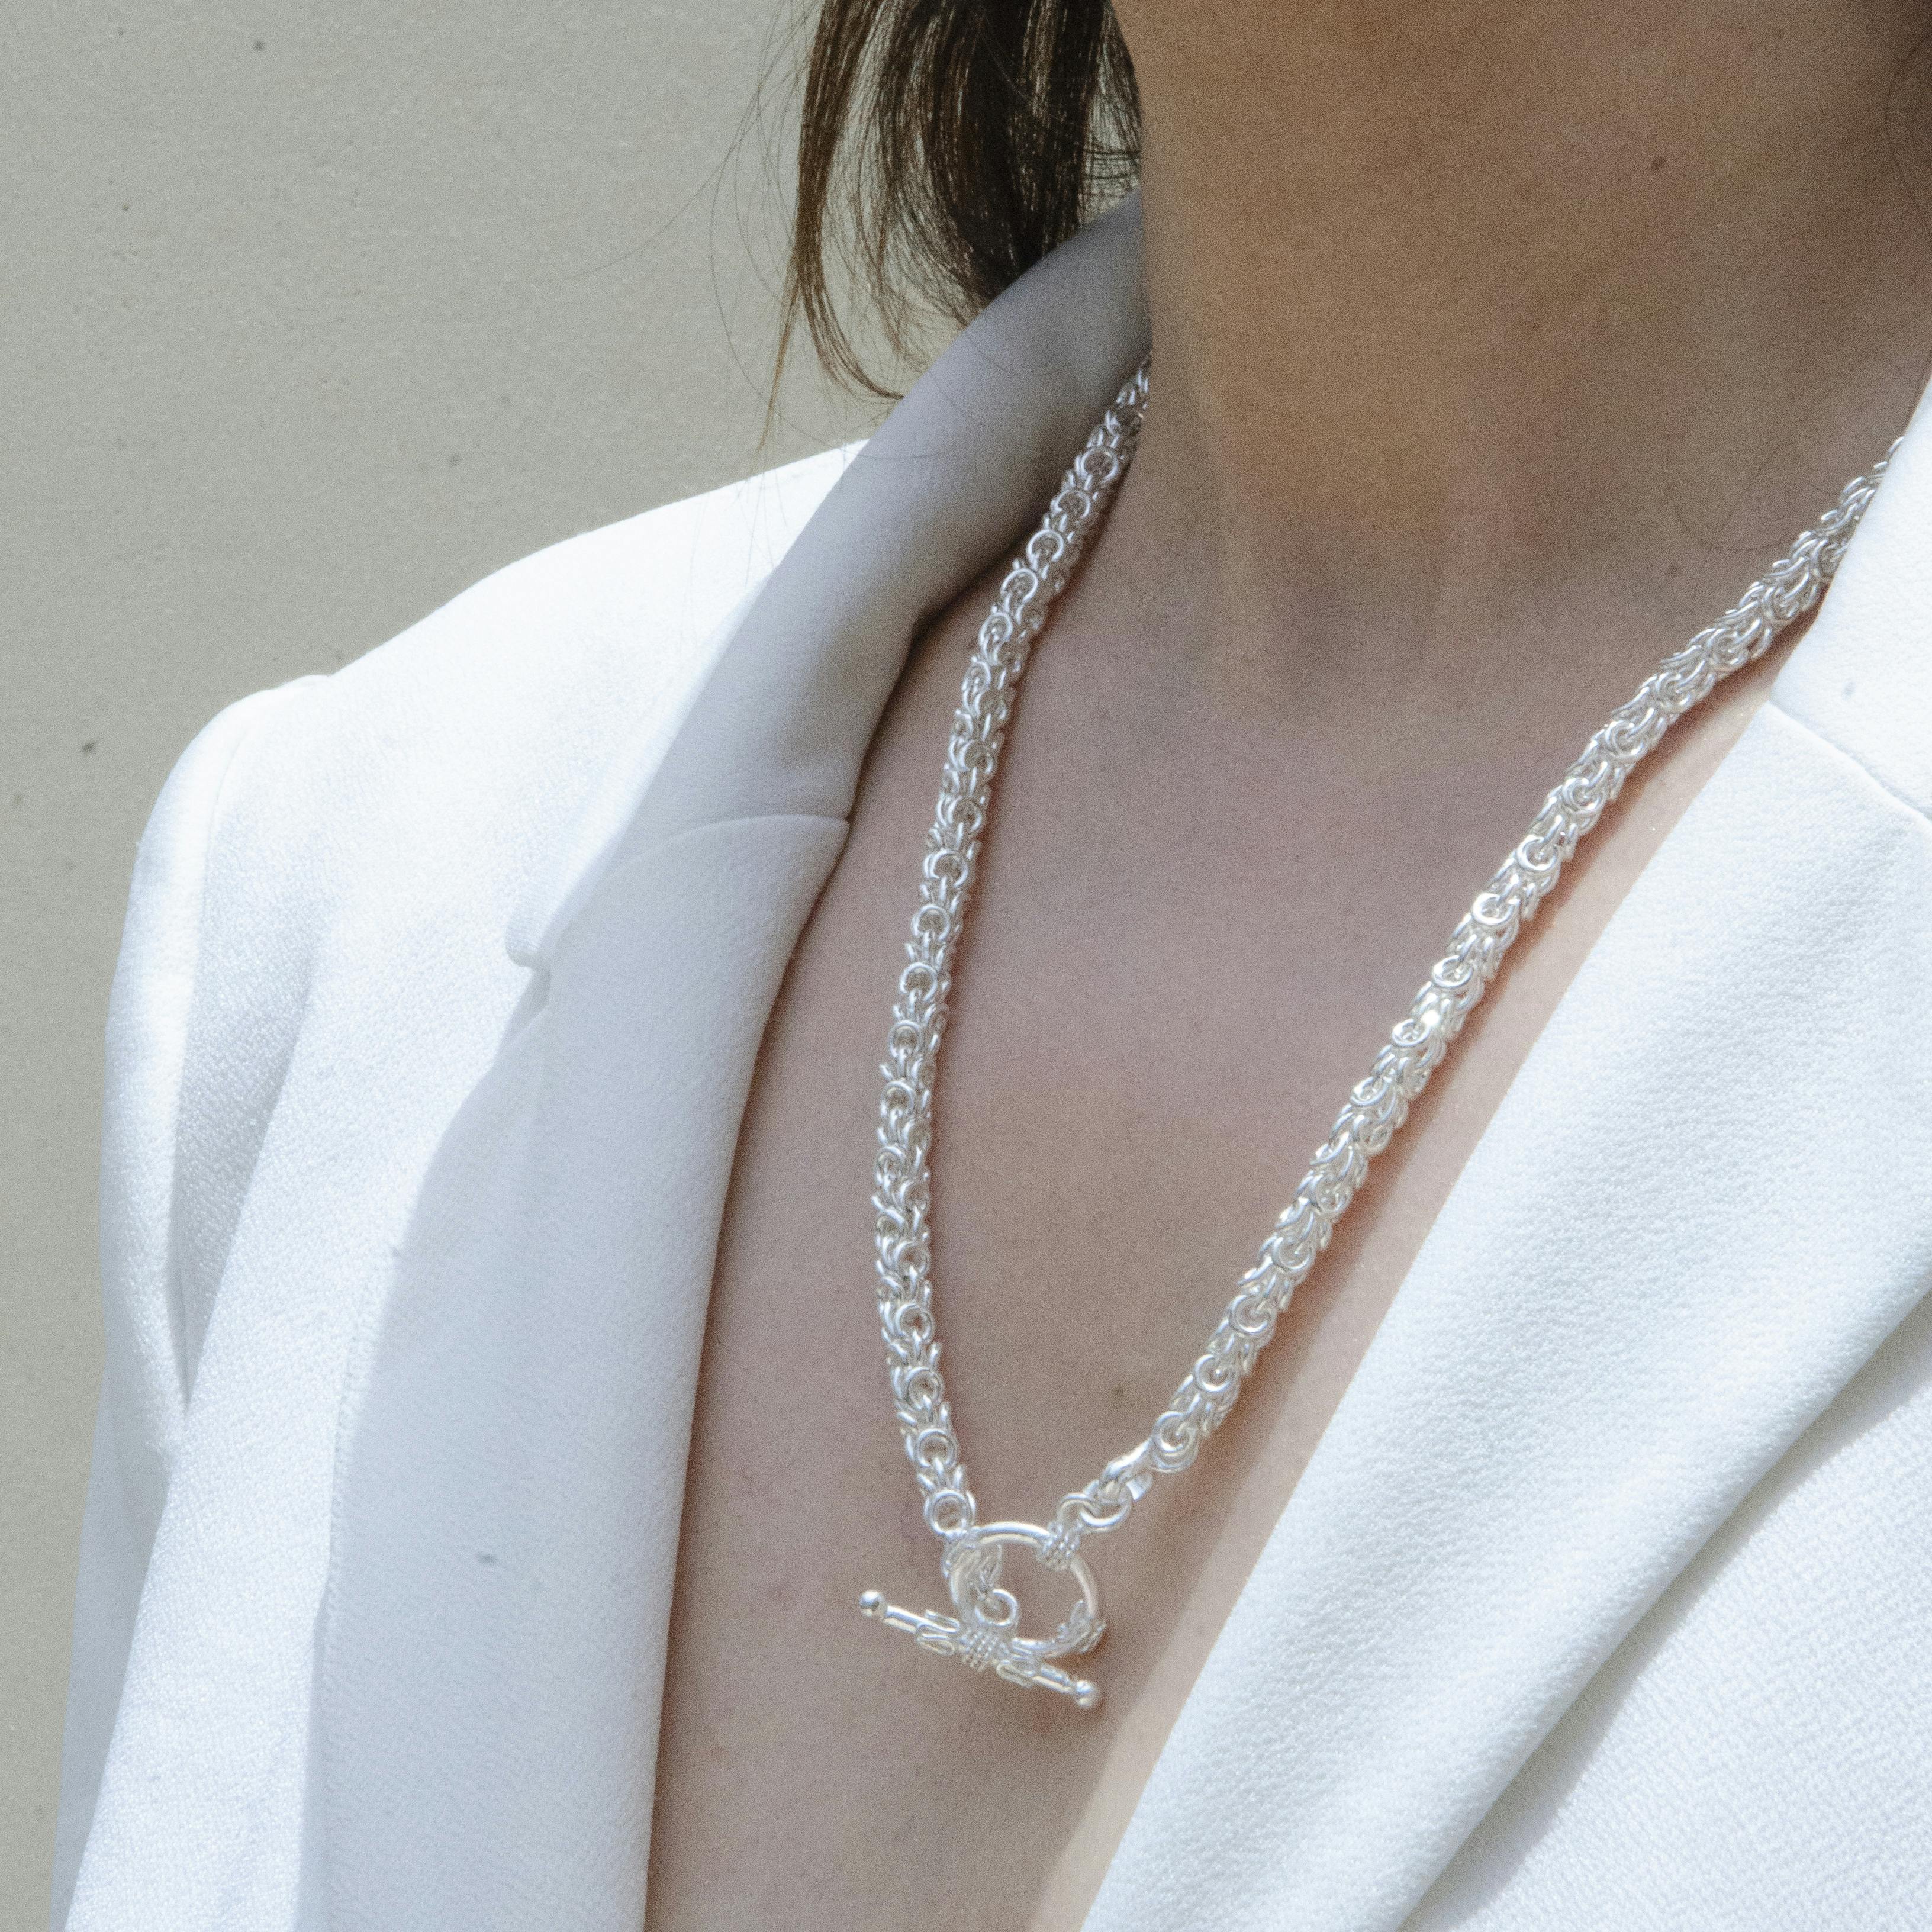 NEXUS LINK NECKLACE SILVER TONE , a product by Equiivalence